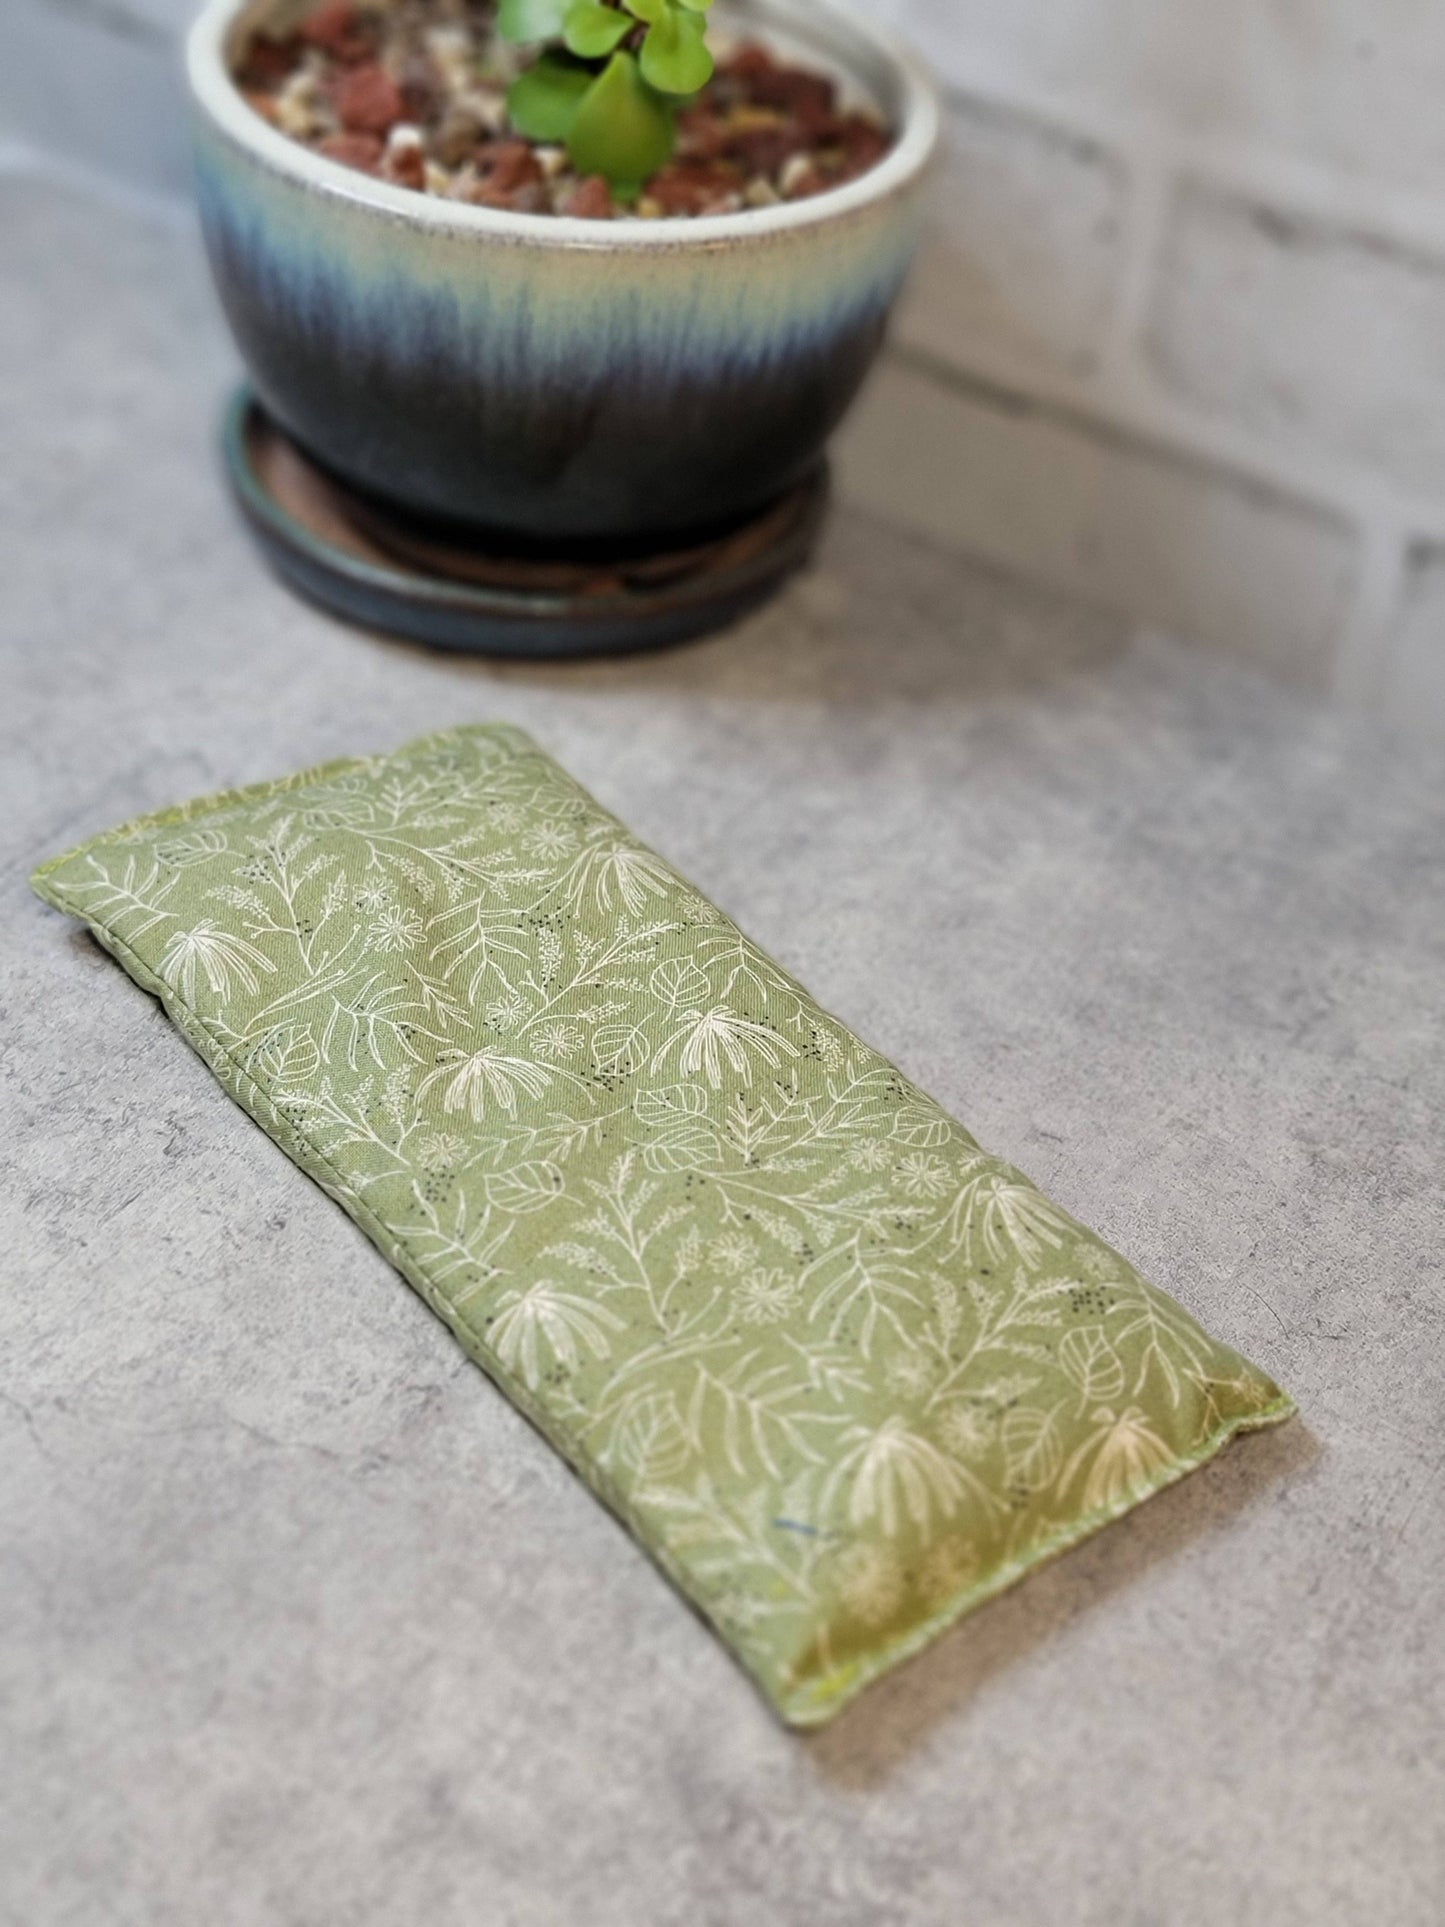 Aromatherapy Hot/Cold Weighted Eye Pillow - Soothing Pattern: Lavender and Peppermint / Rice and Flaxseed Mix / Boho Wildflowers